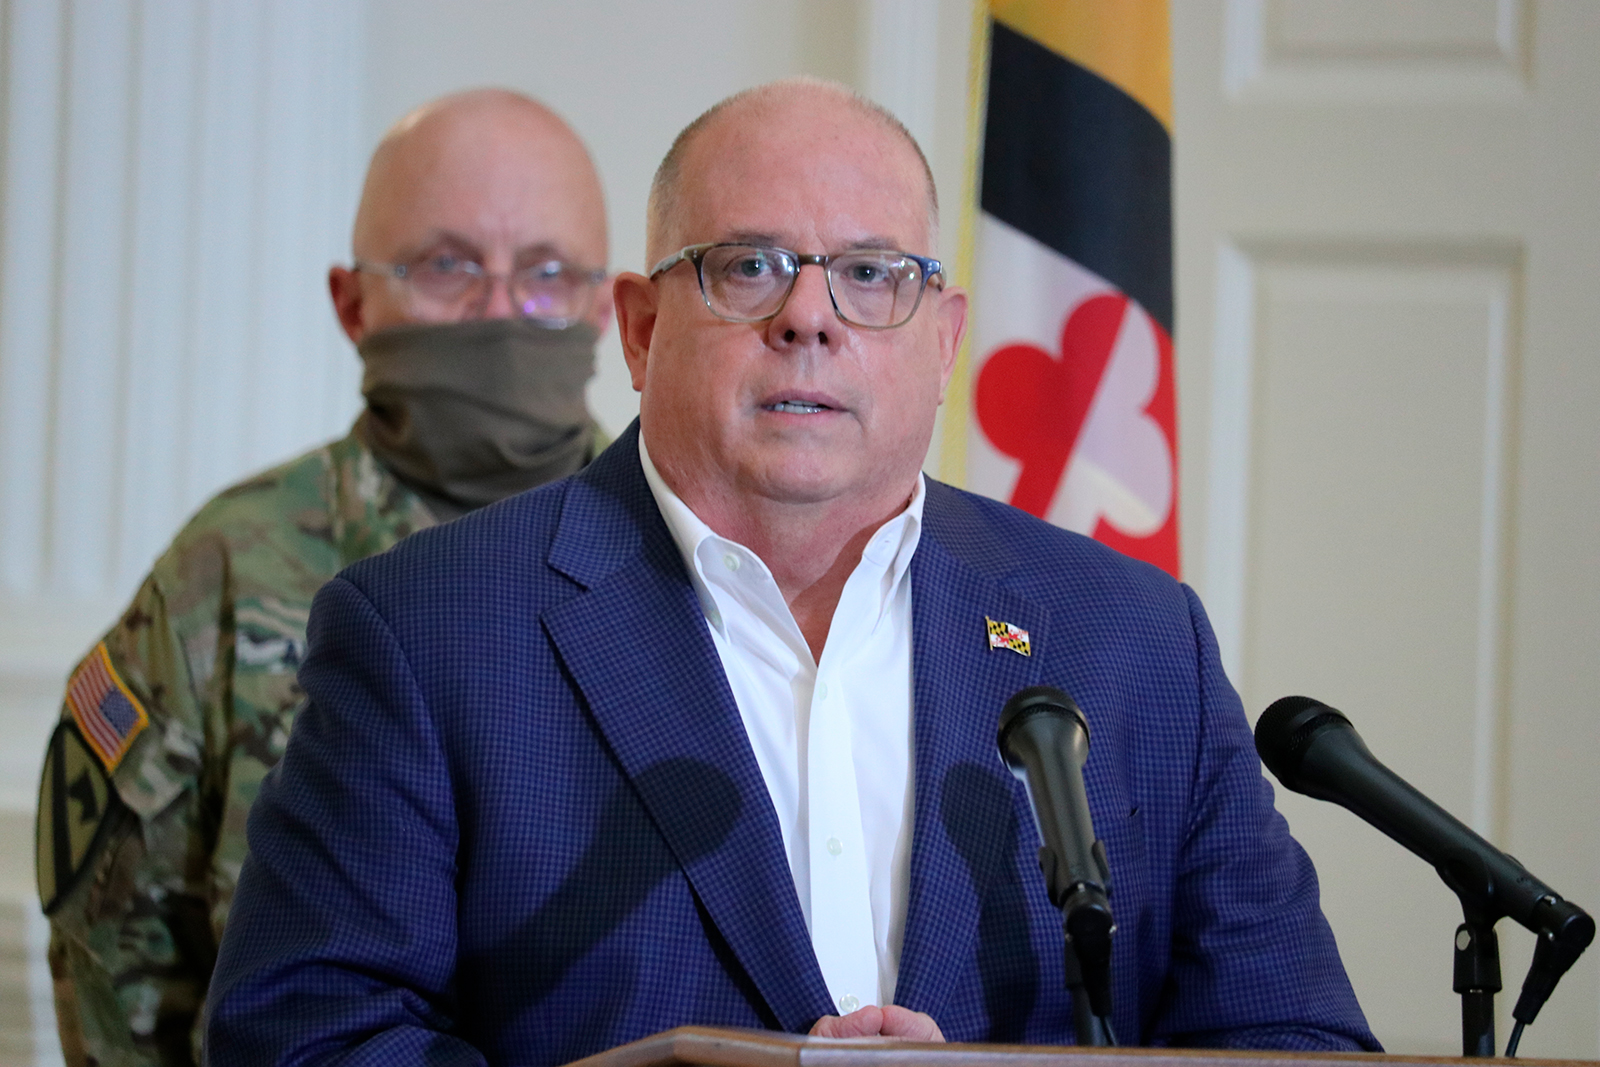 Maryland Gov. Larry Hogan announces that all nursing homes and assisted-living facilities in the state must conduct universal coronavirus testing of all residents and staff, whether they have symptoms or not, during a news conference on April 29, in Annapolis, Maryland.